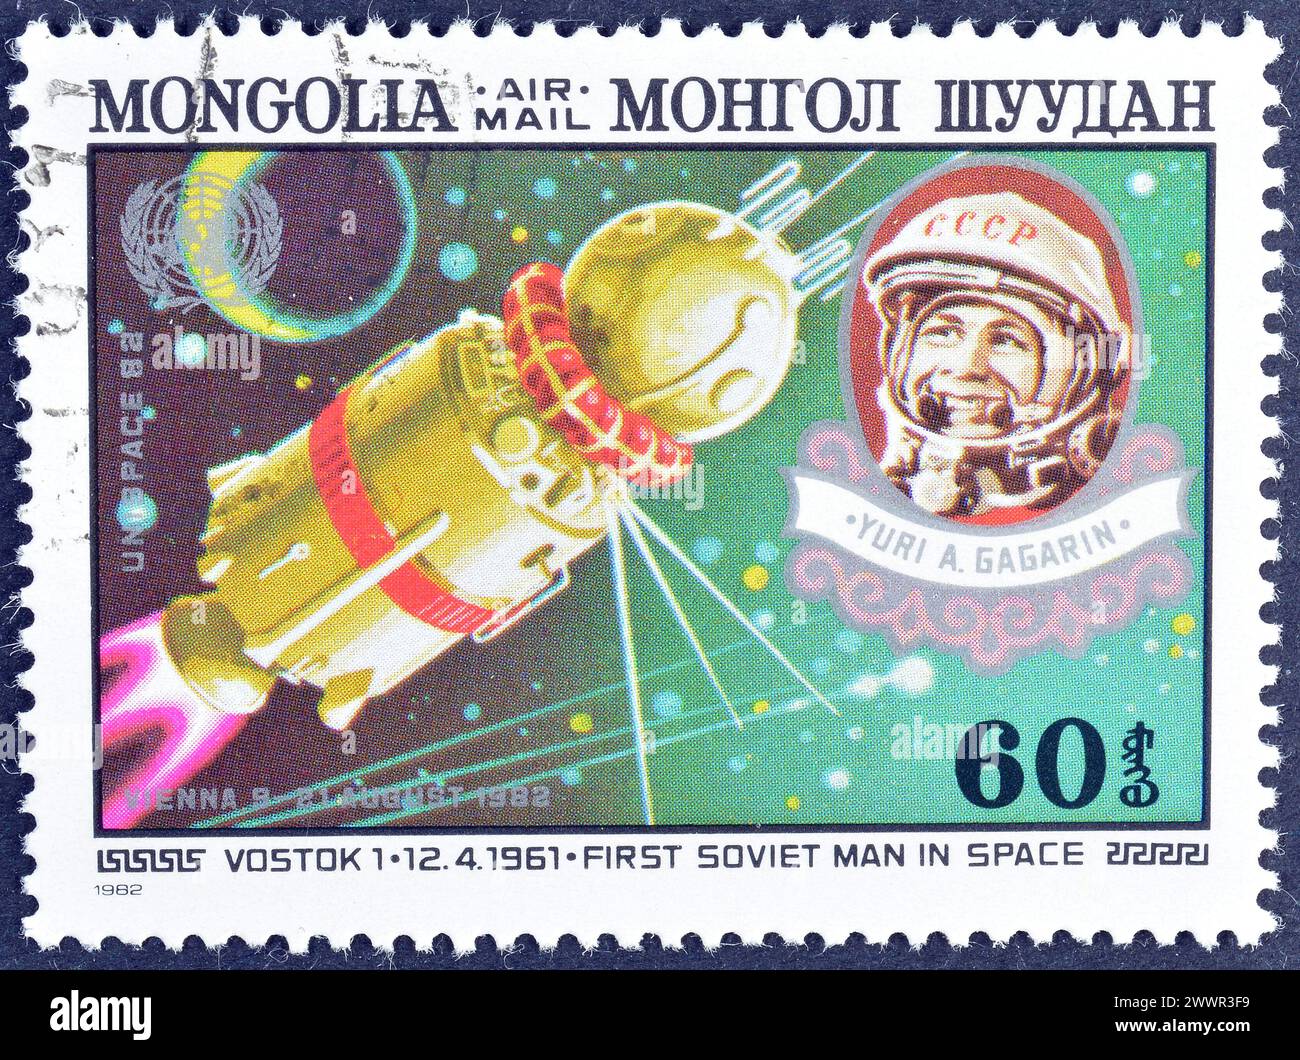 Cancelled postage stamp printed by Mongolia, that shows Vostok 1 and Yuri Gagarin, 2nd UN Conference on Peaceful Uses of Outer Space, circa 1982. Stock Photo